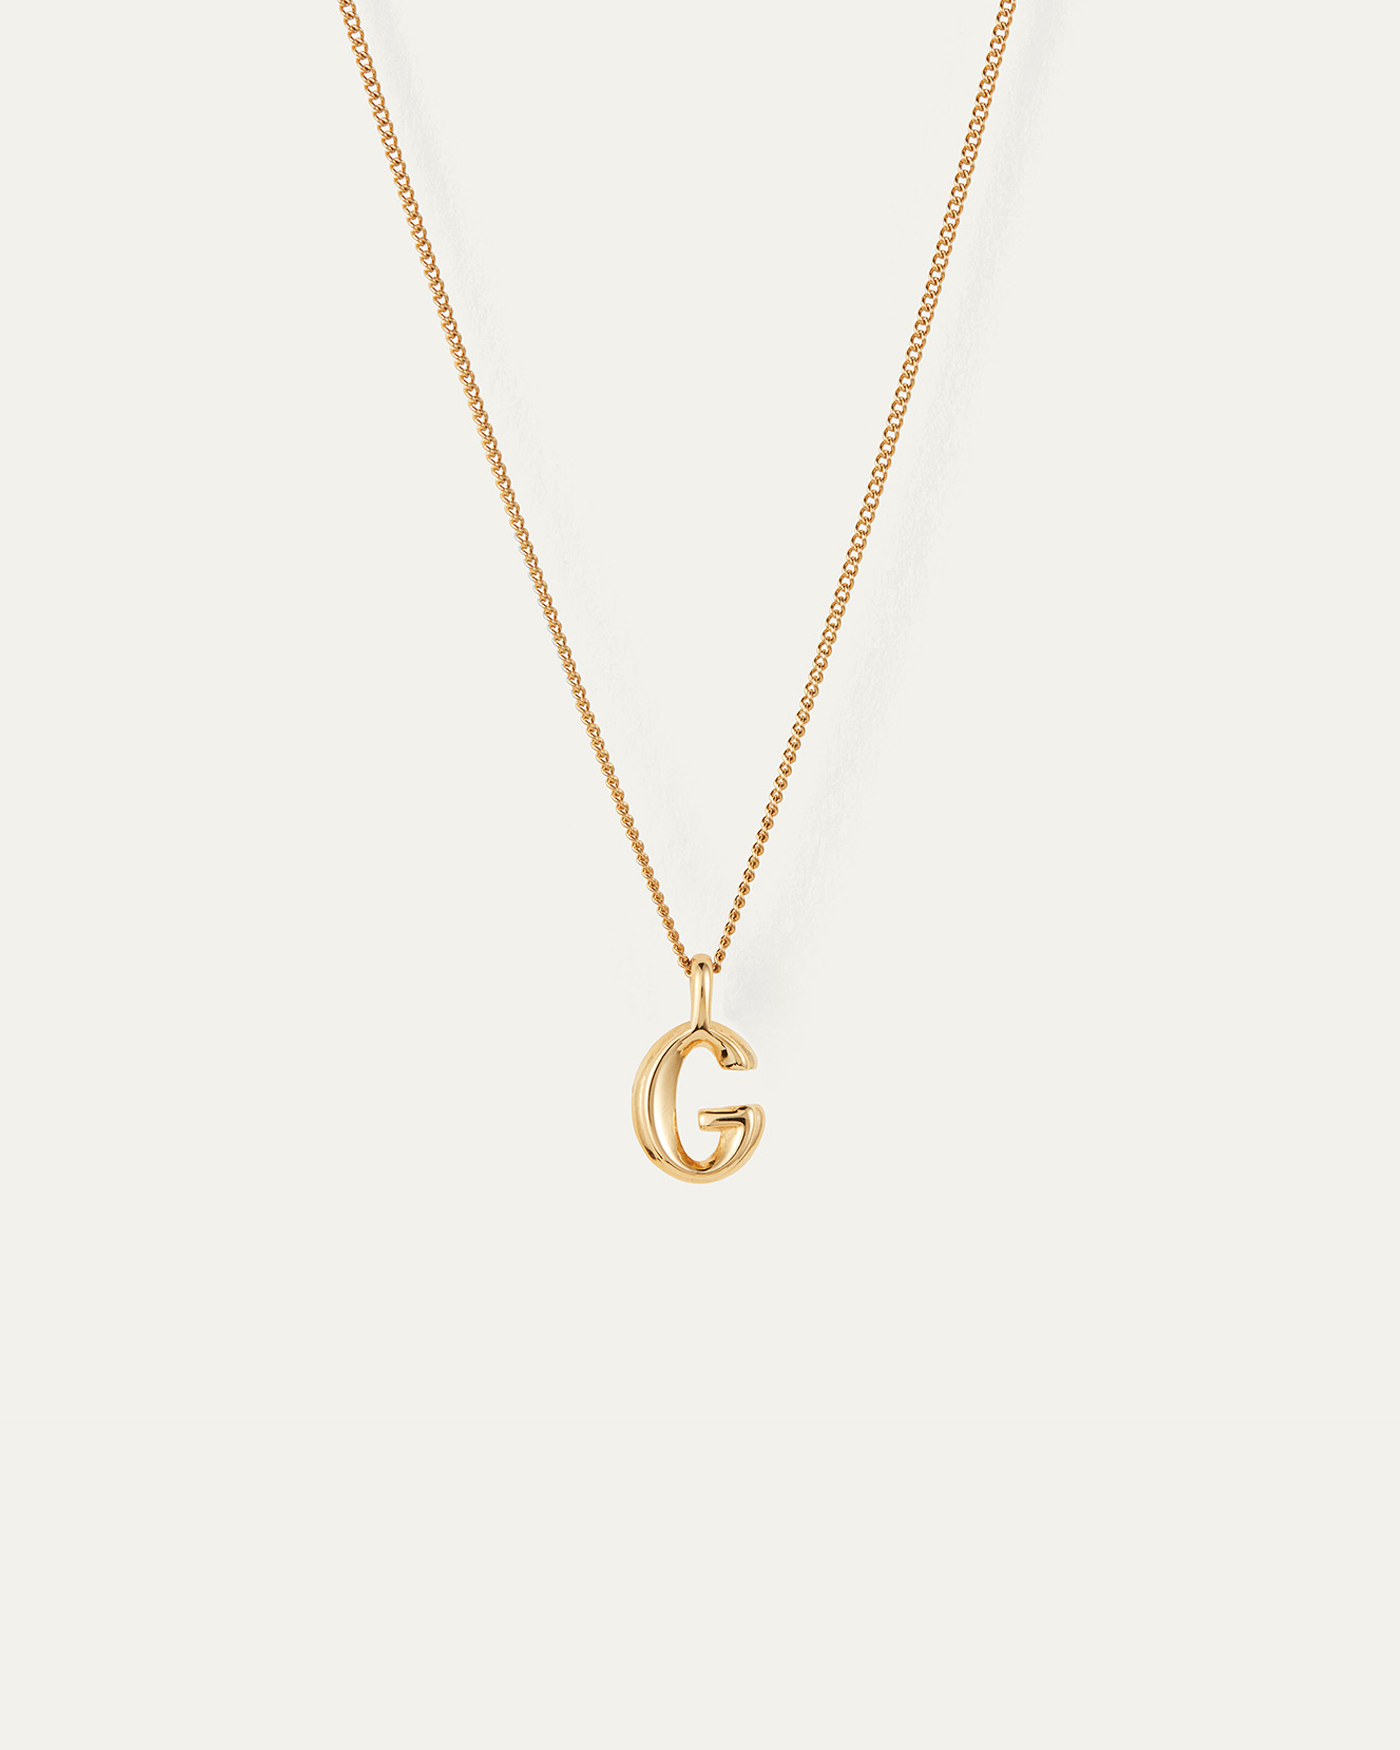 Diamond Gold Letter Necklace - G – Segal Jewelry